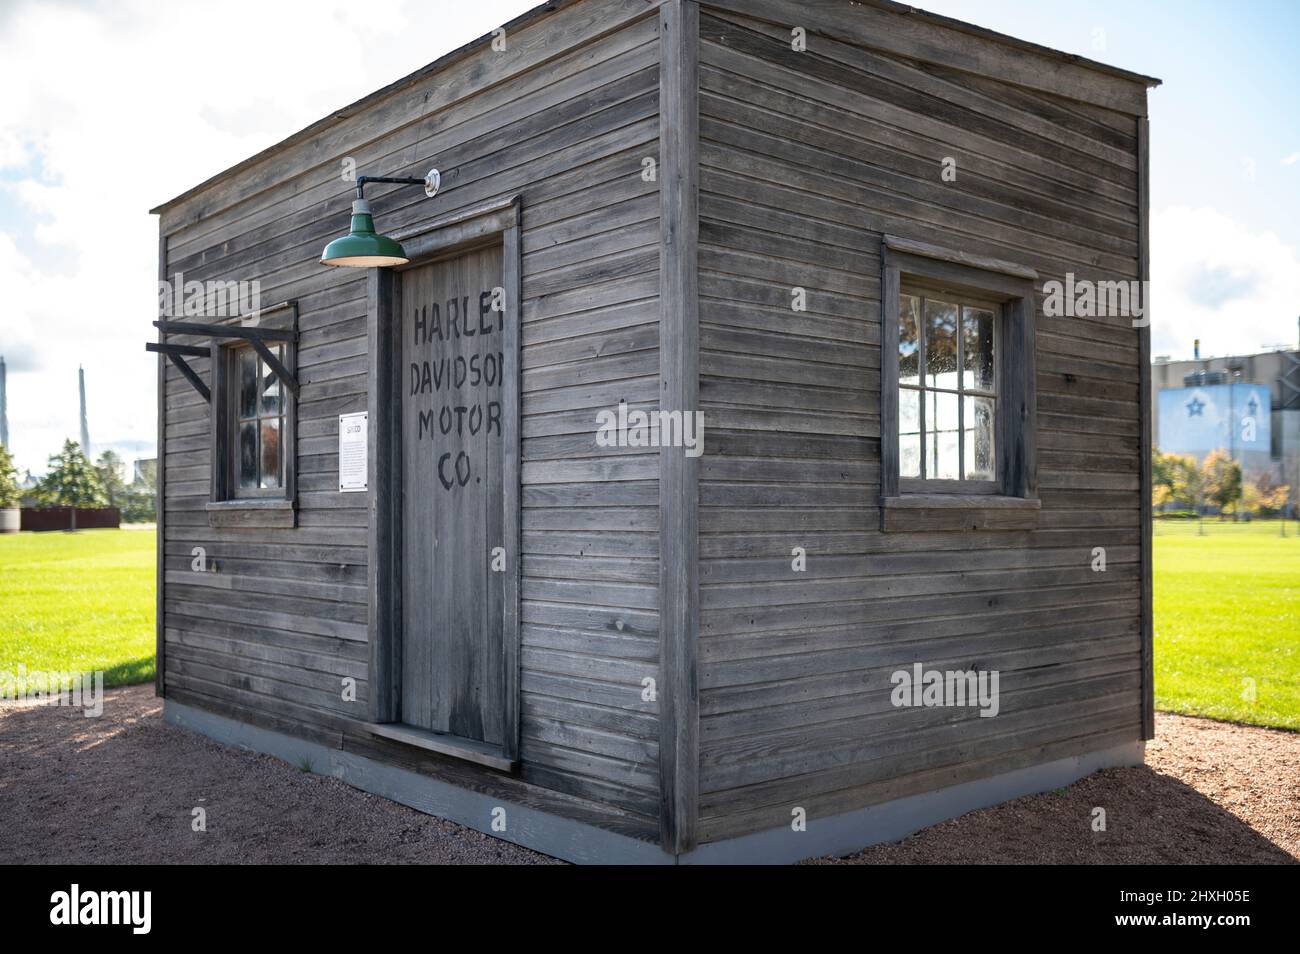 replica of the 'The Shed' showing the first home of the Harley-Davidson located outside the Harley-Davidson museum in Milwaukee, Wisconsin, USA Stock Photo